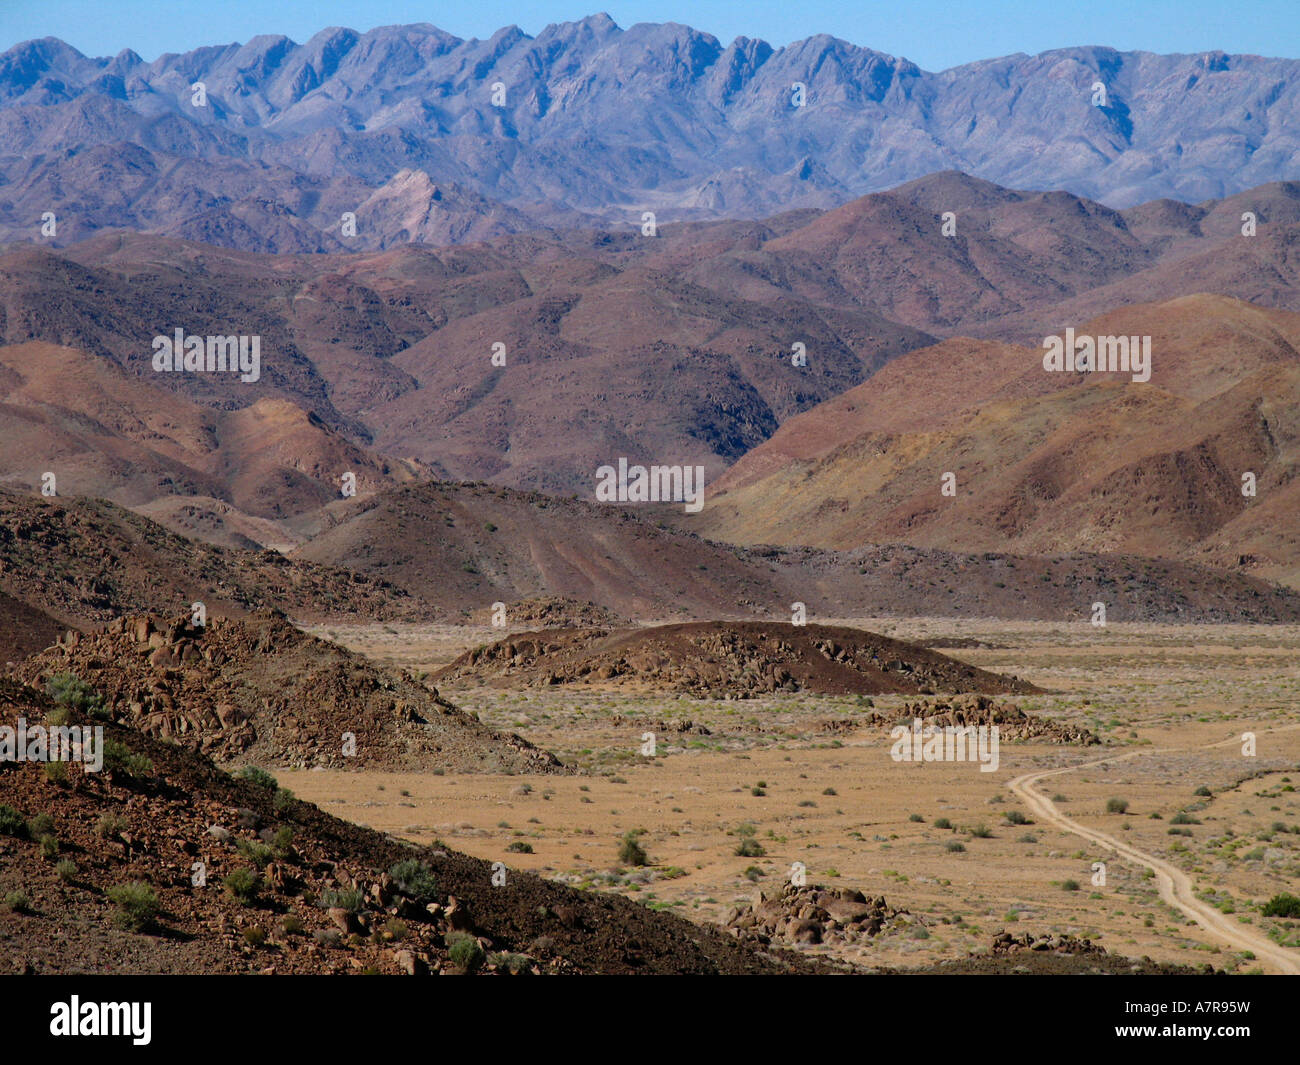 Mountain desert landscape with jeep track Richtersveld Northern Cape South Africa Stock Photo